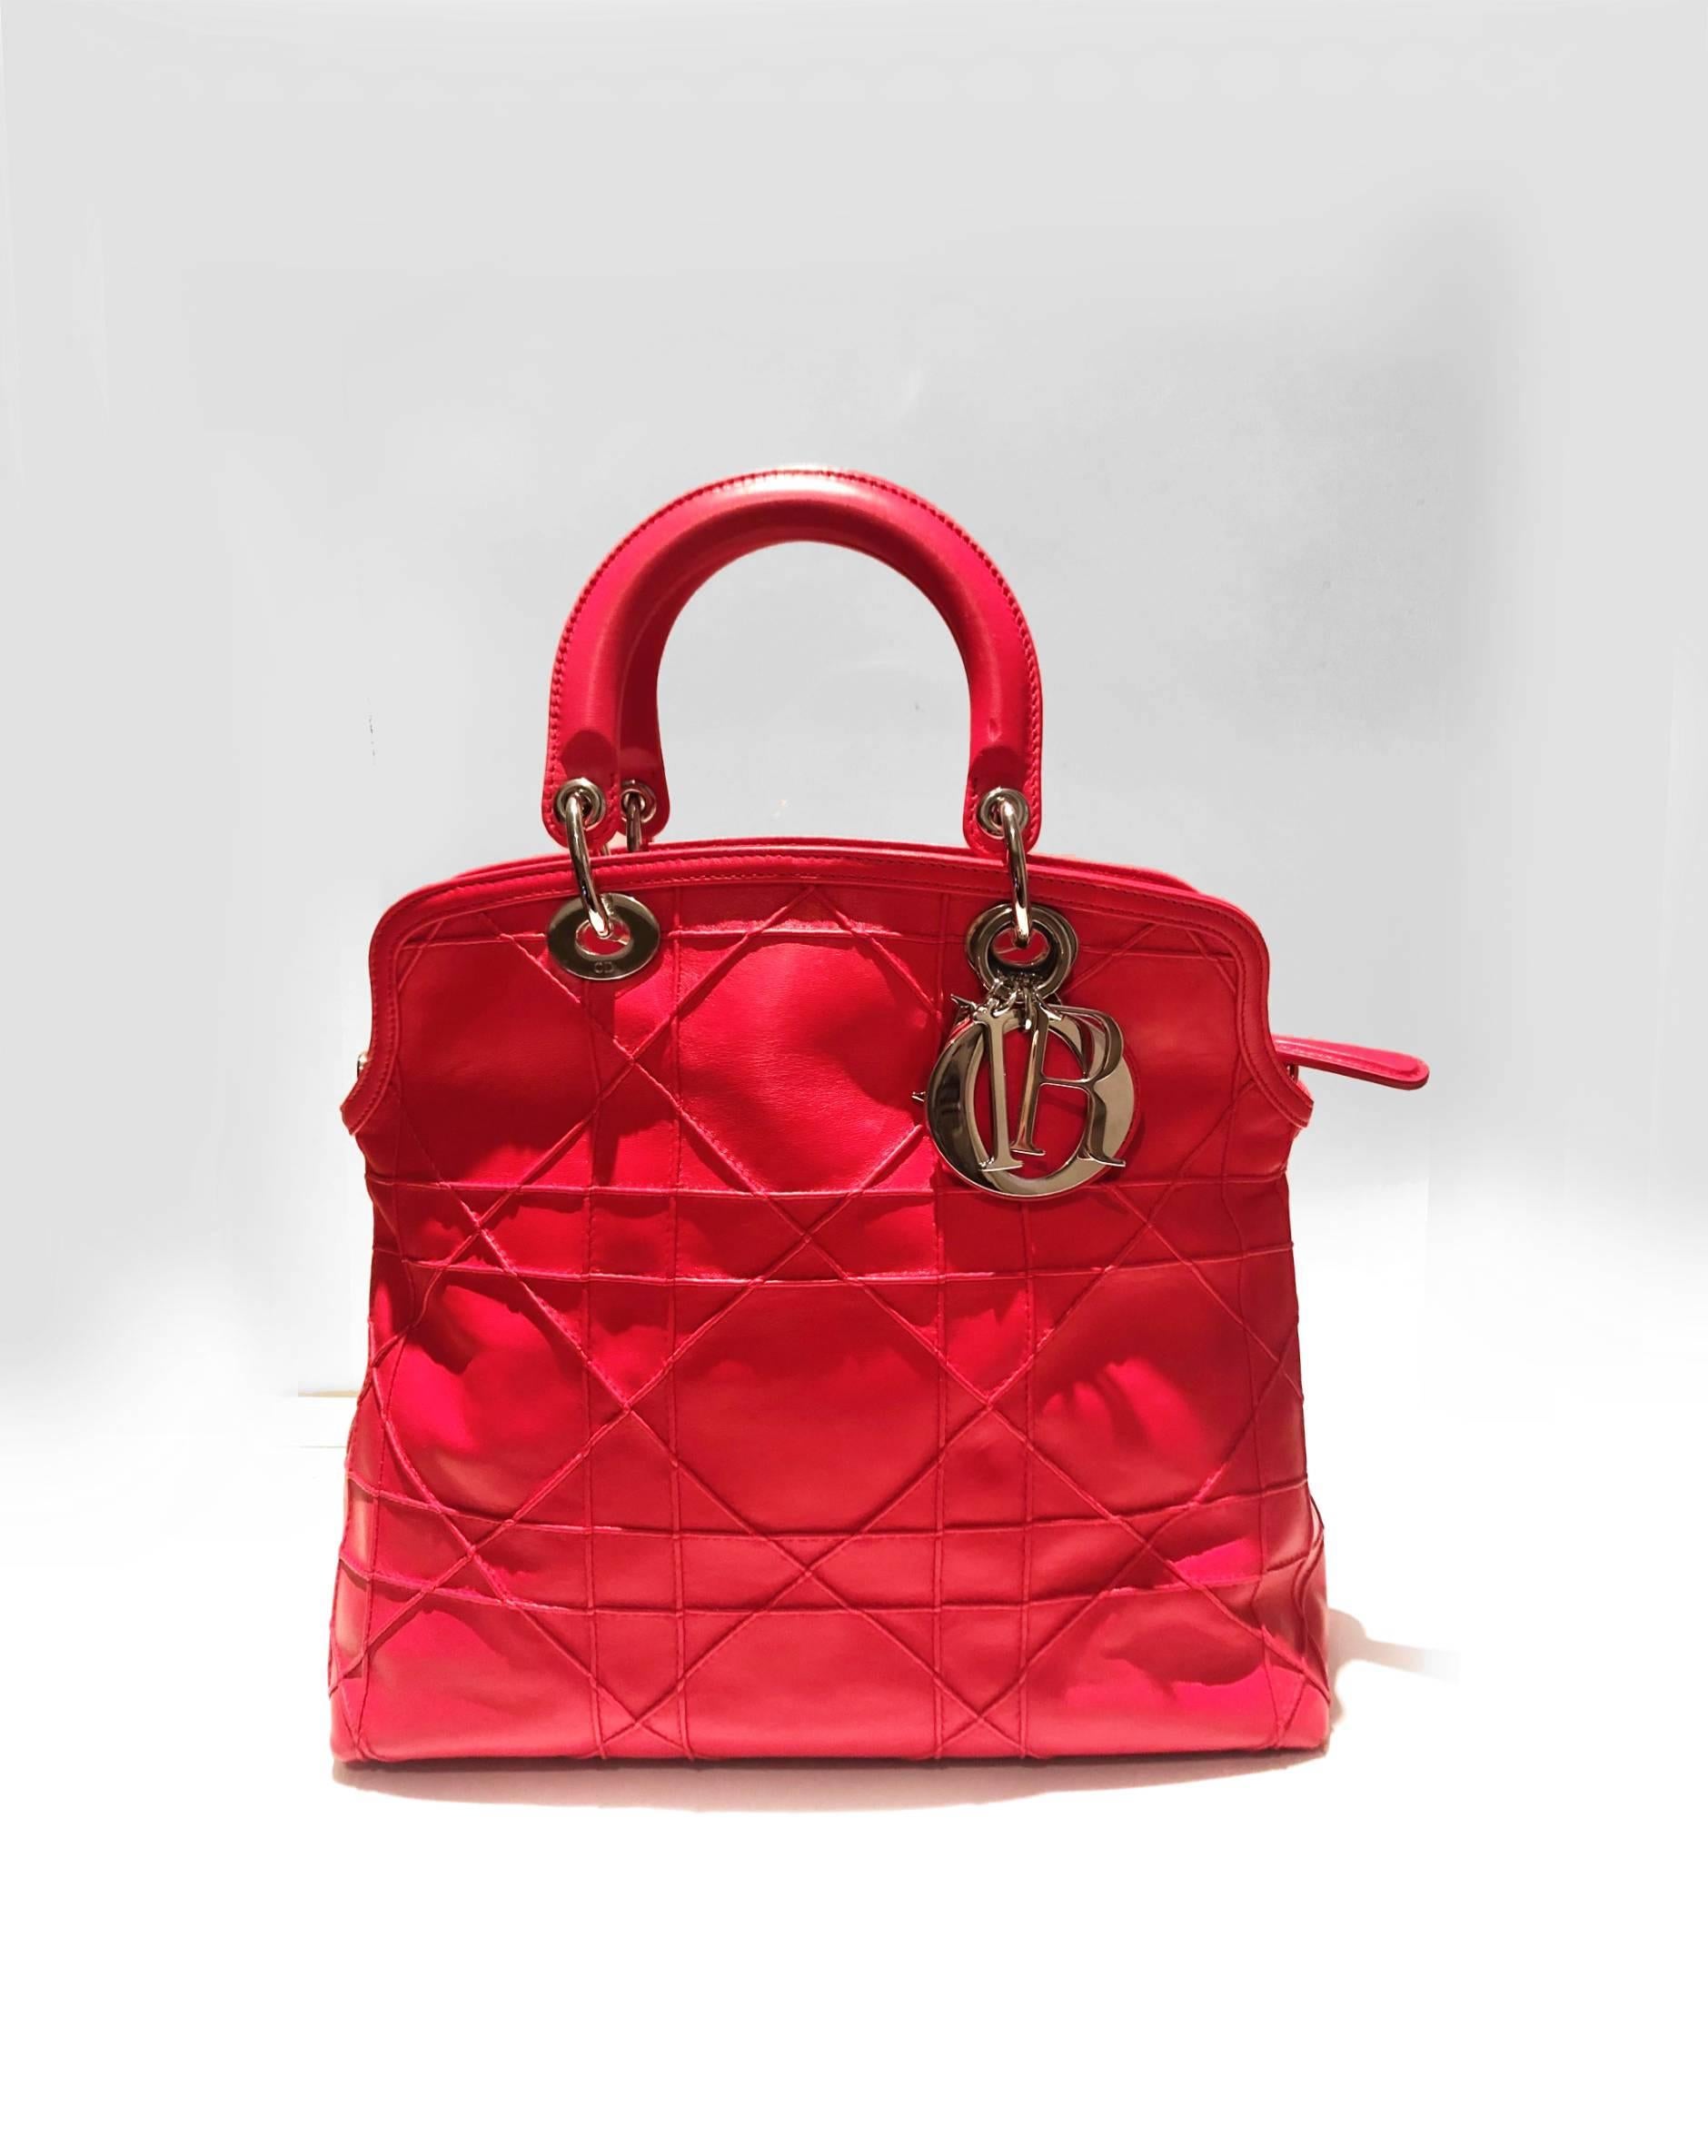 Christian Dior Granville Dior calfskin leather tote bag in strawberry red with Cannage stitching, double internal compartments, buttoned and zipped, double handles, interior zip and patch pockets, tonal metal 'D.I.O.R.' charms. can be carried by